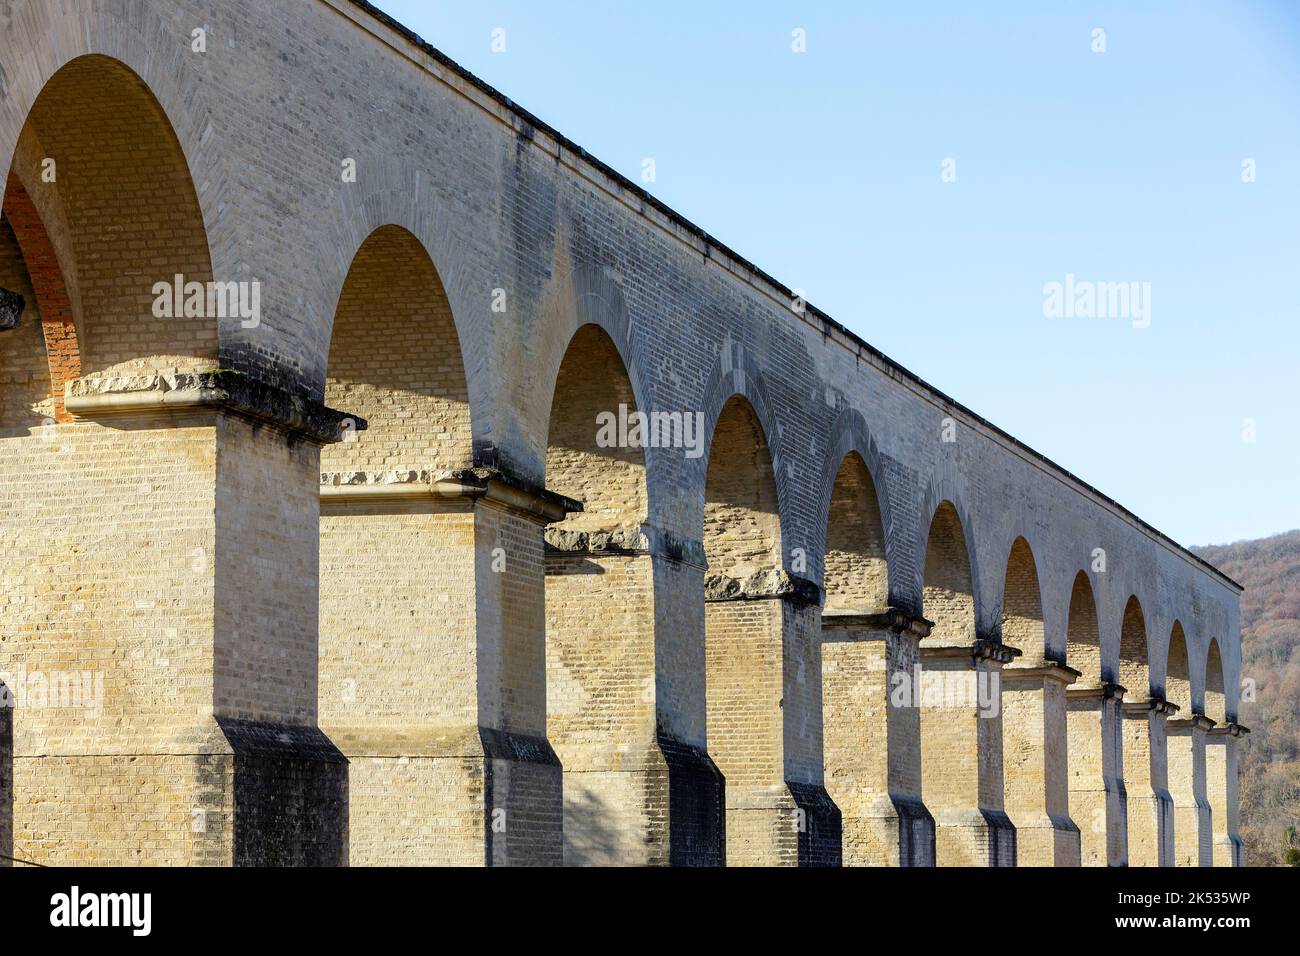 France, Moselle, Jouy aux Arches, 2nd century Gorze Roman aquaduct which crossed the Moselle river between Ars sur Moselle and Jouy aux Arches to brin Stock Photo